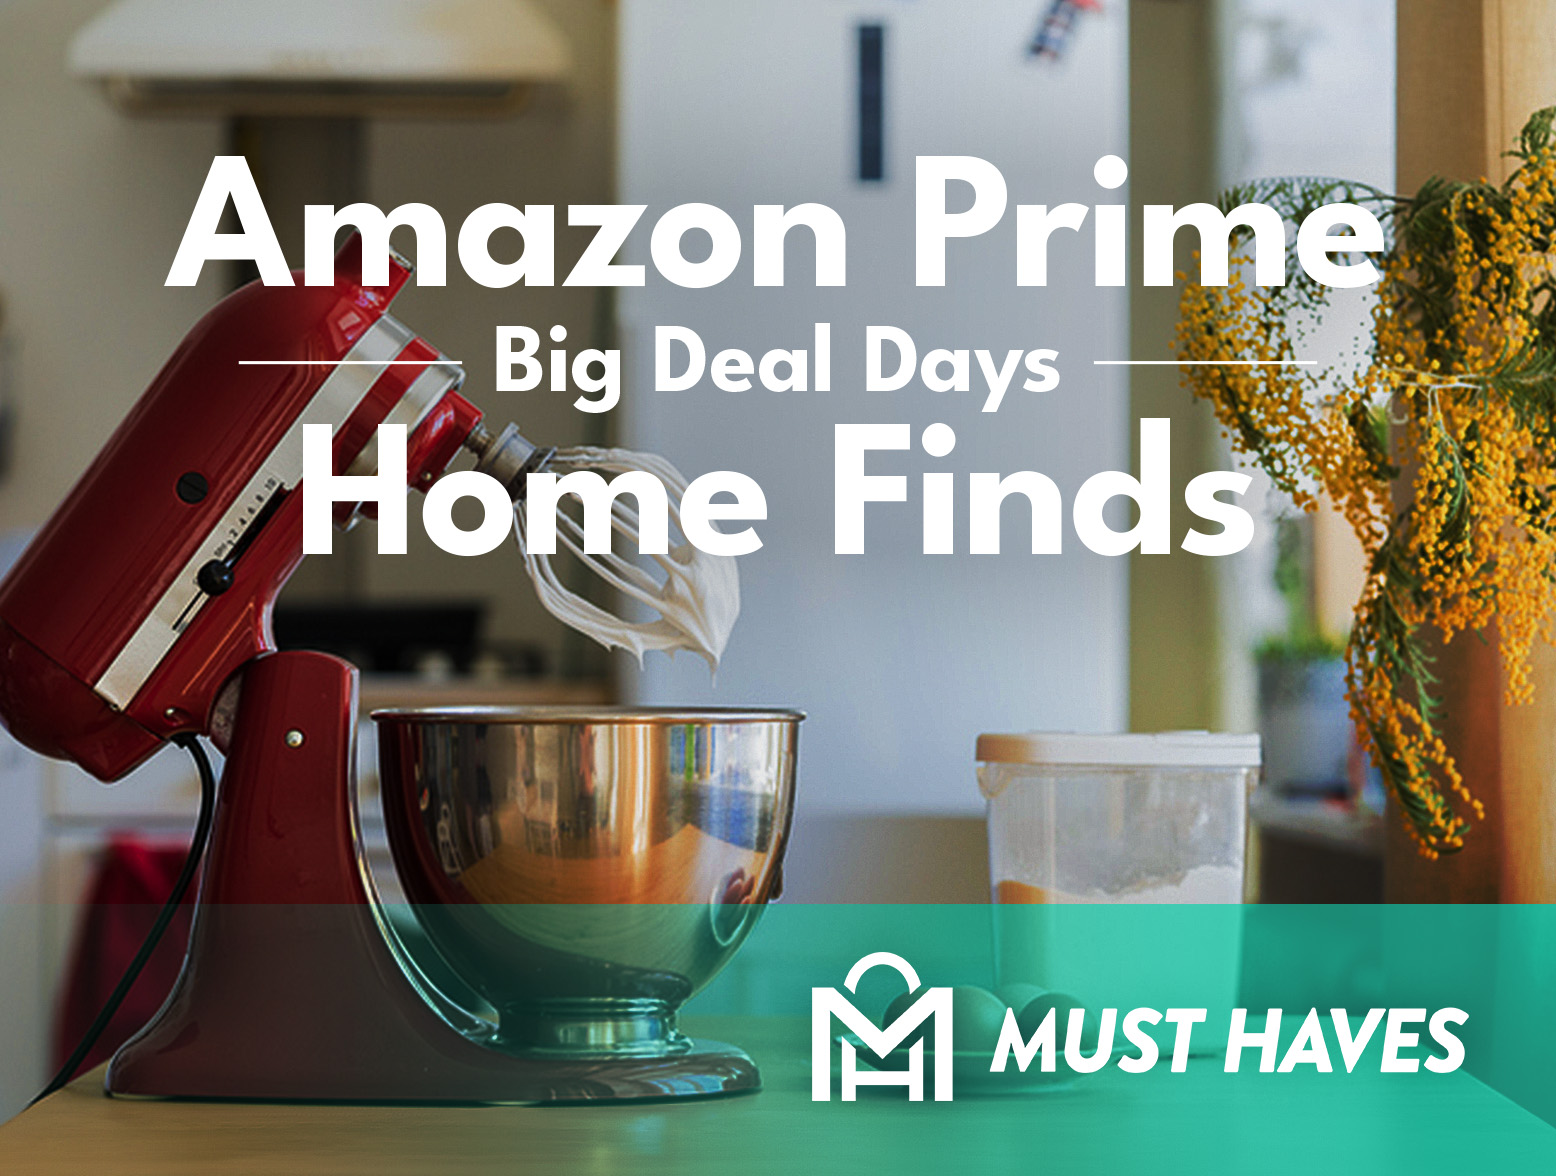 Amazon Prime Big Deal Days Home Finds